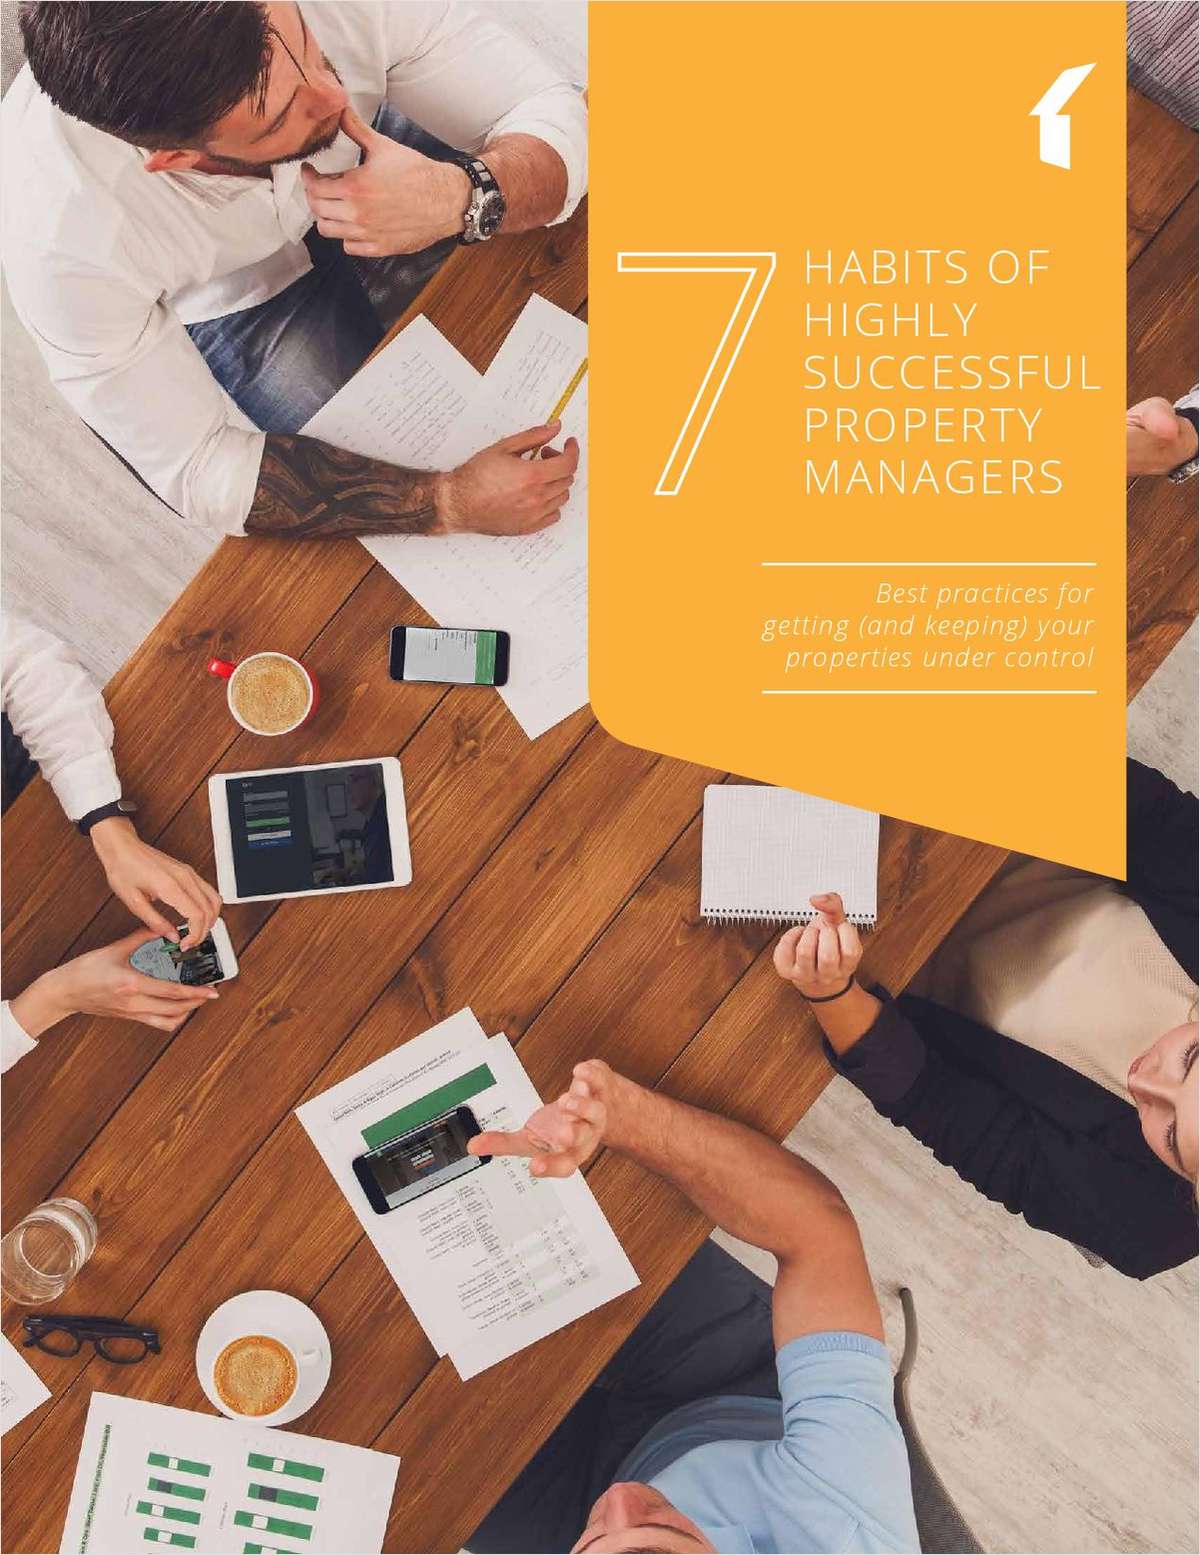 The 7 Habits of Highly Successful Property Managers